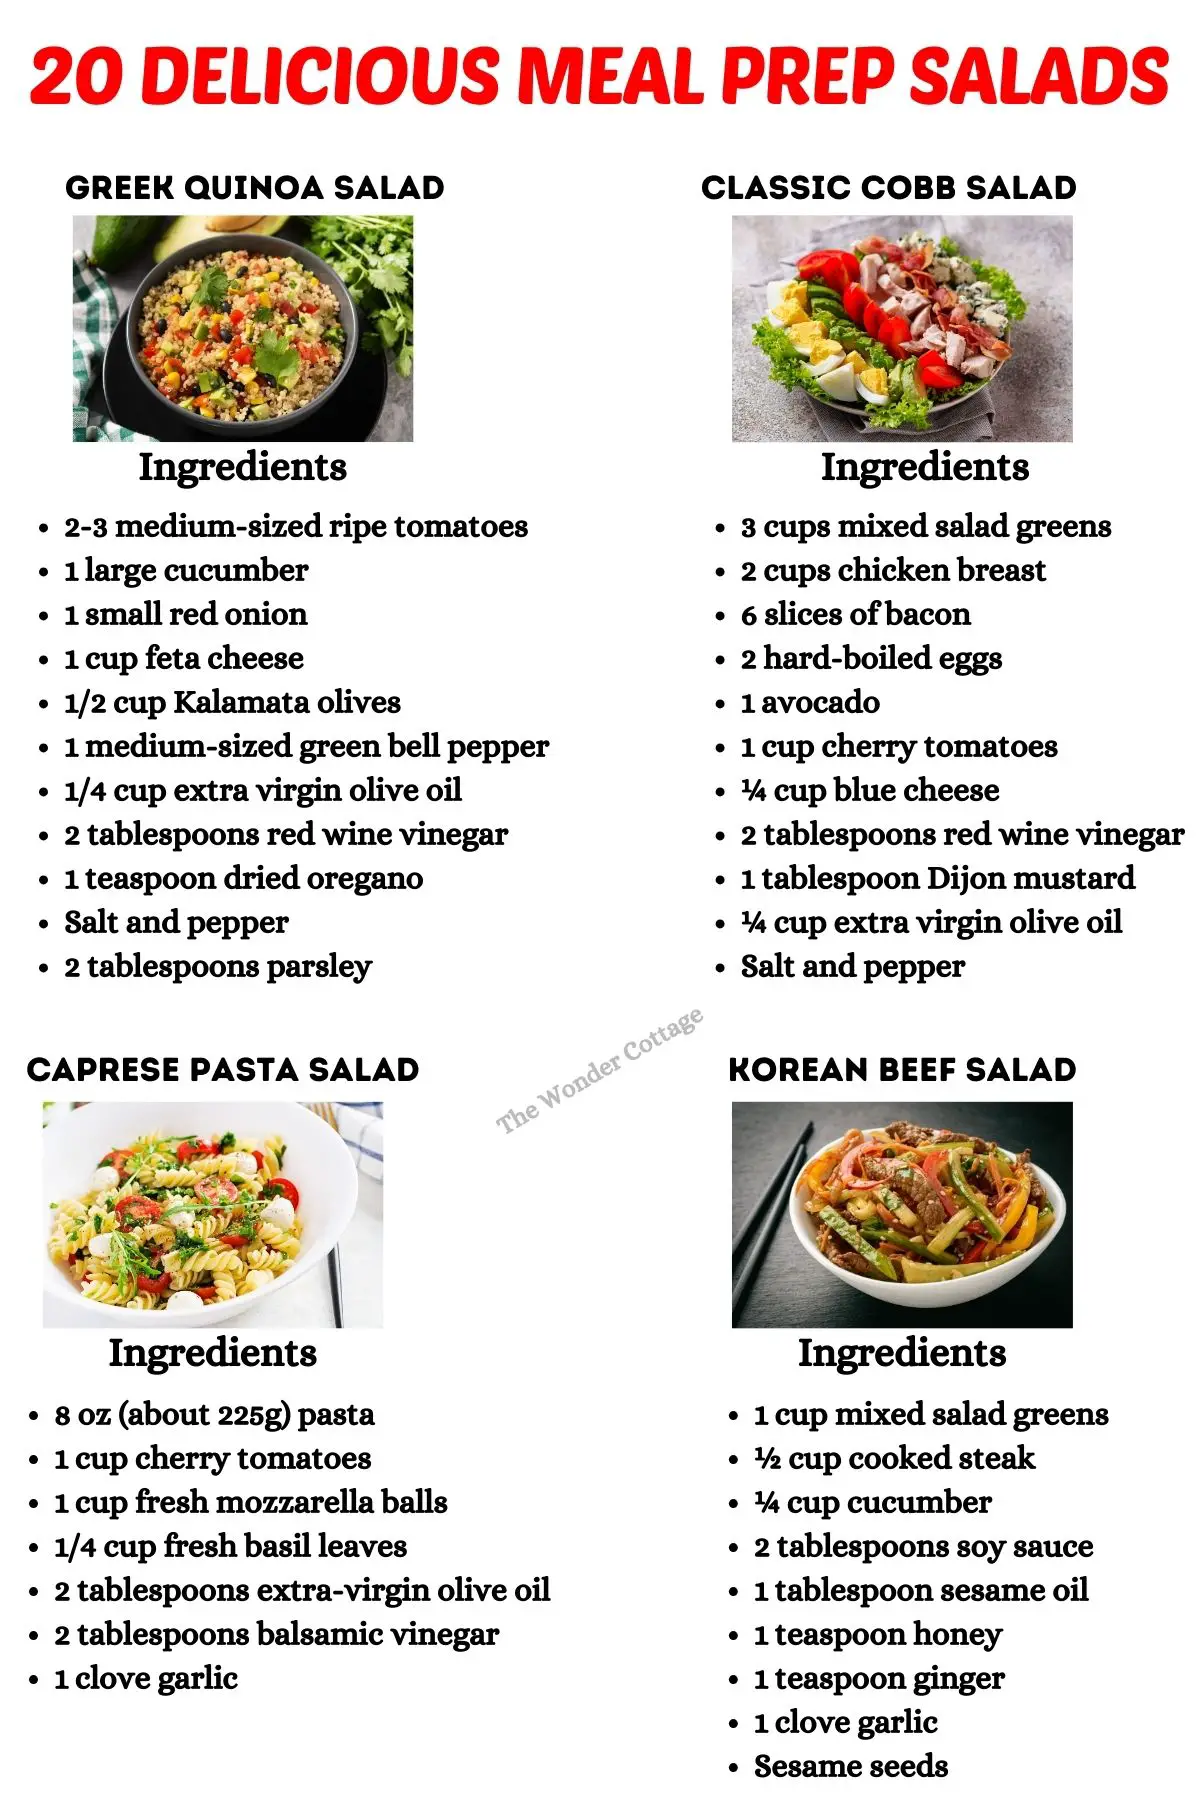 20 Delicious Meal Prep Salads